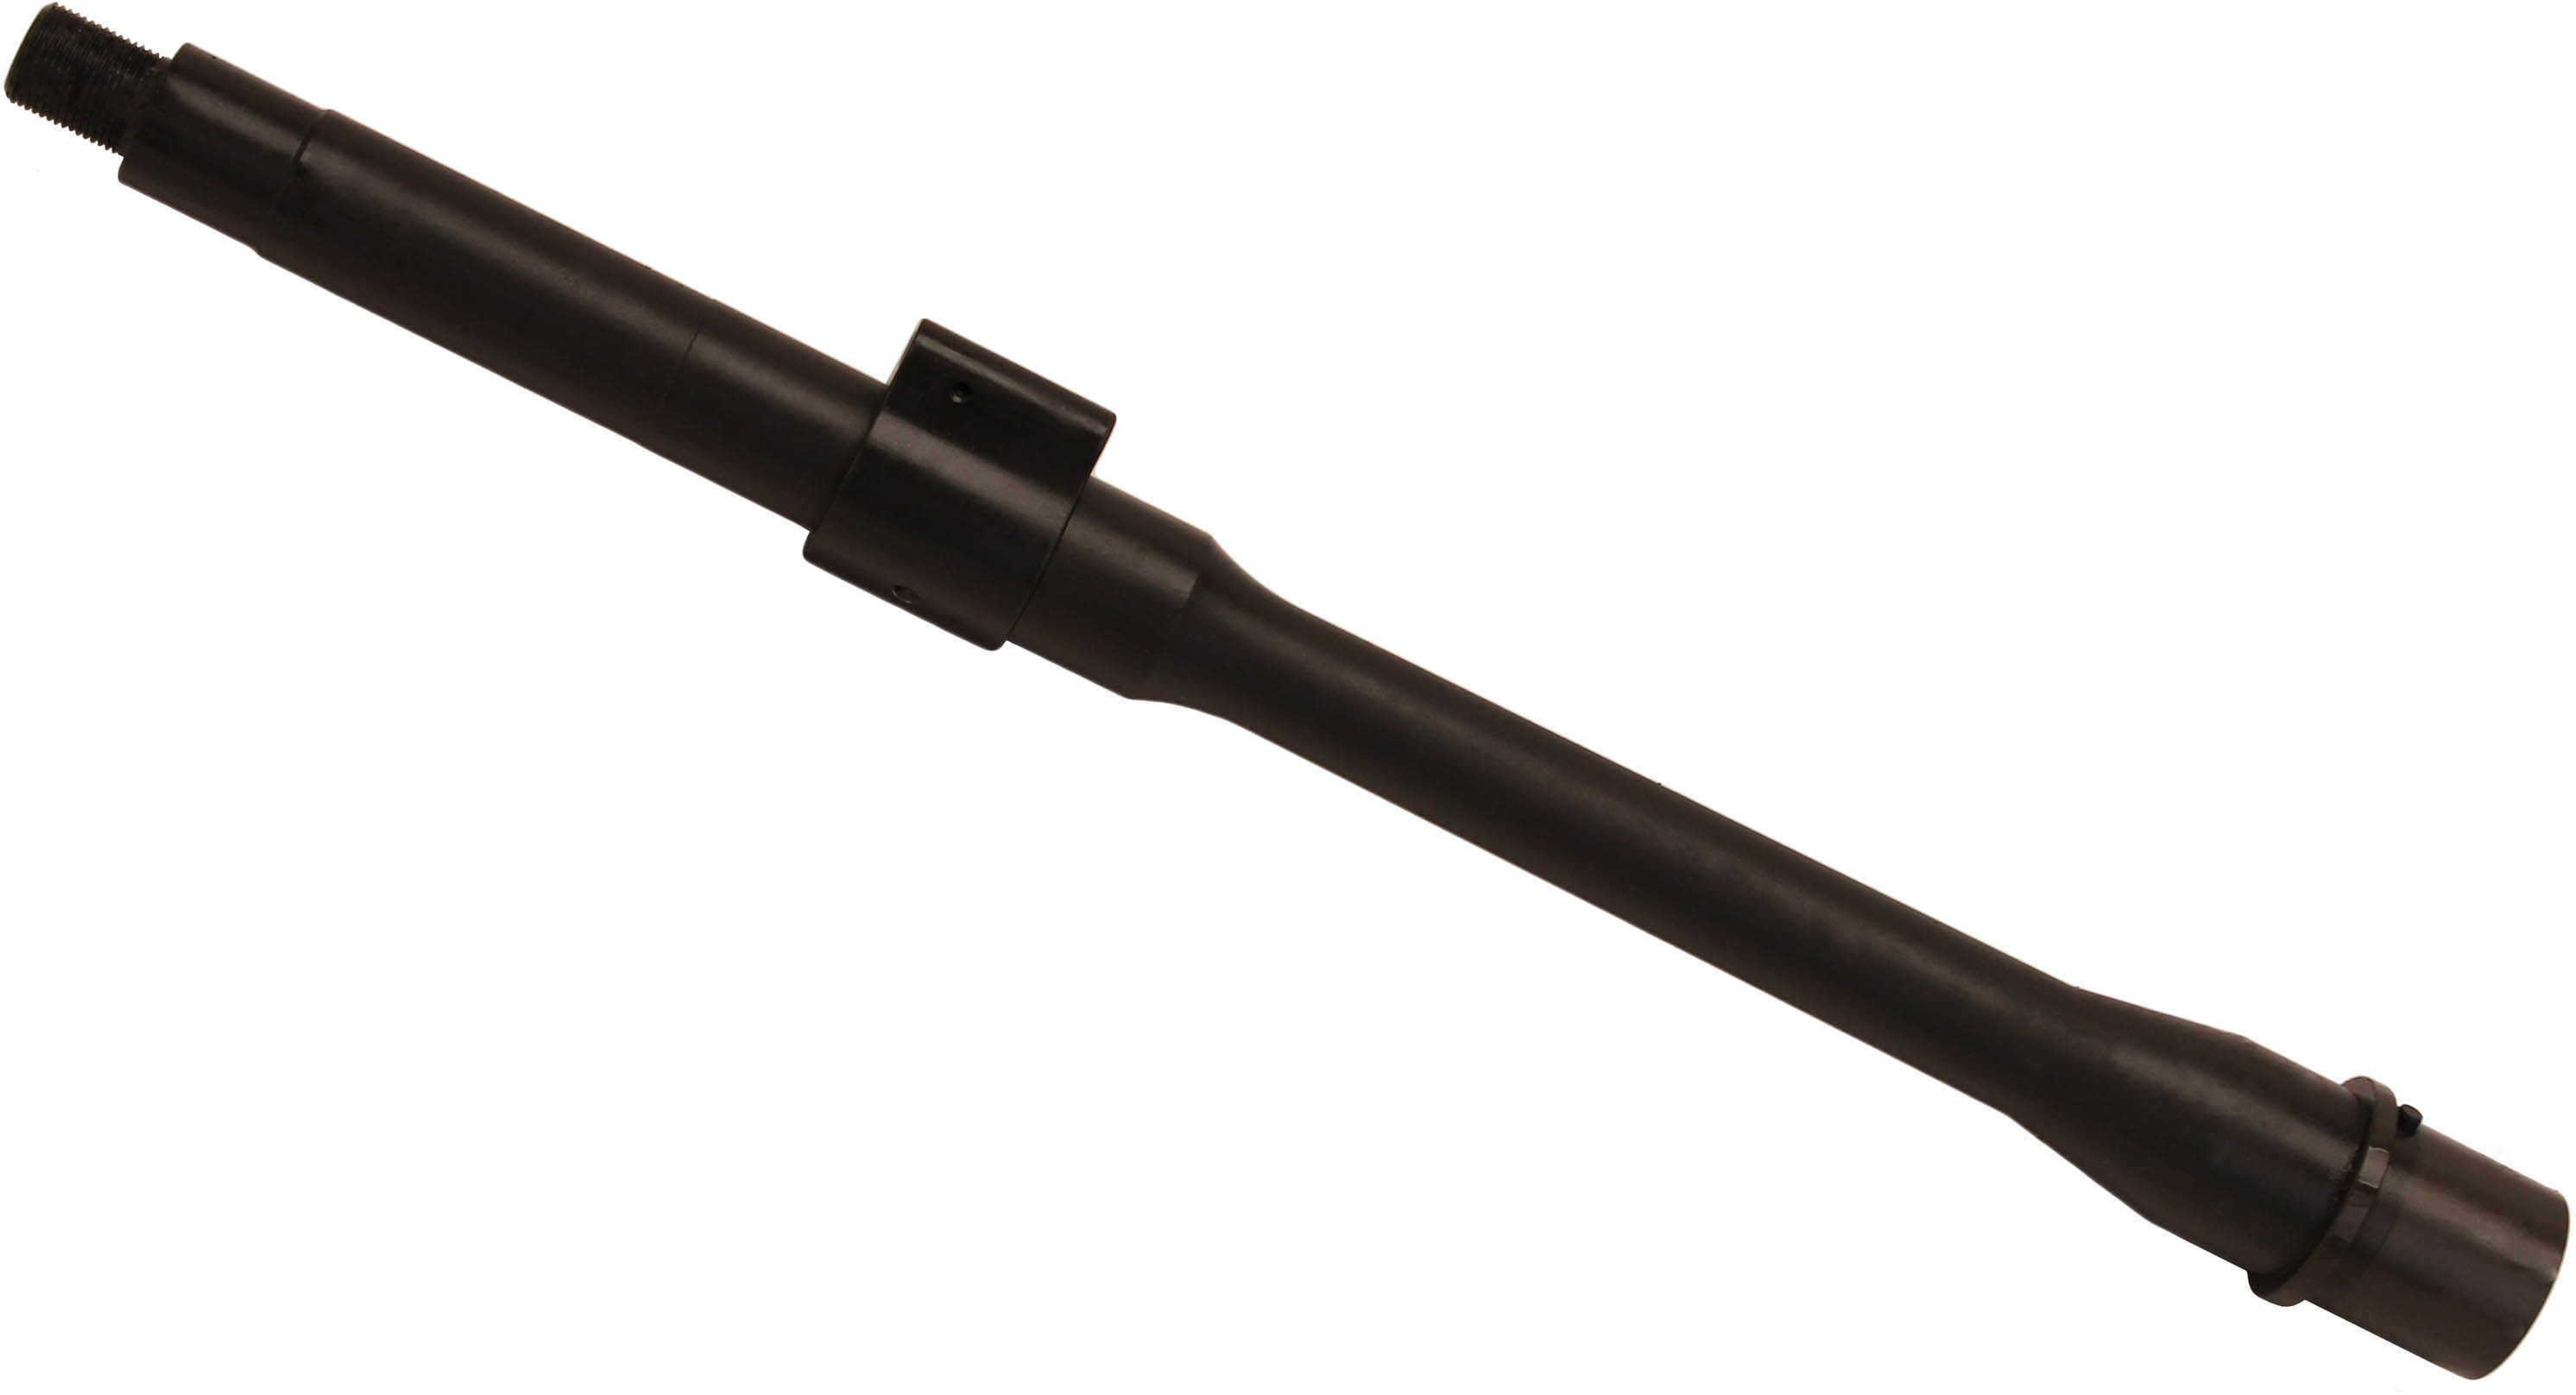 Daniel Defense Barrel Assembly CMV CHF 5.56/1:7 12.50" Government Carbine with LPG Md: 07-077-07208